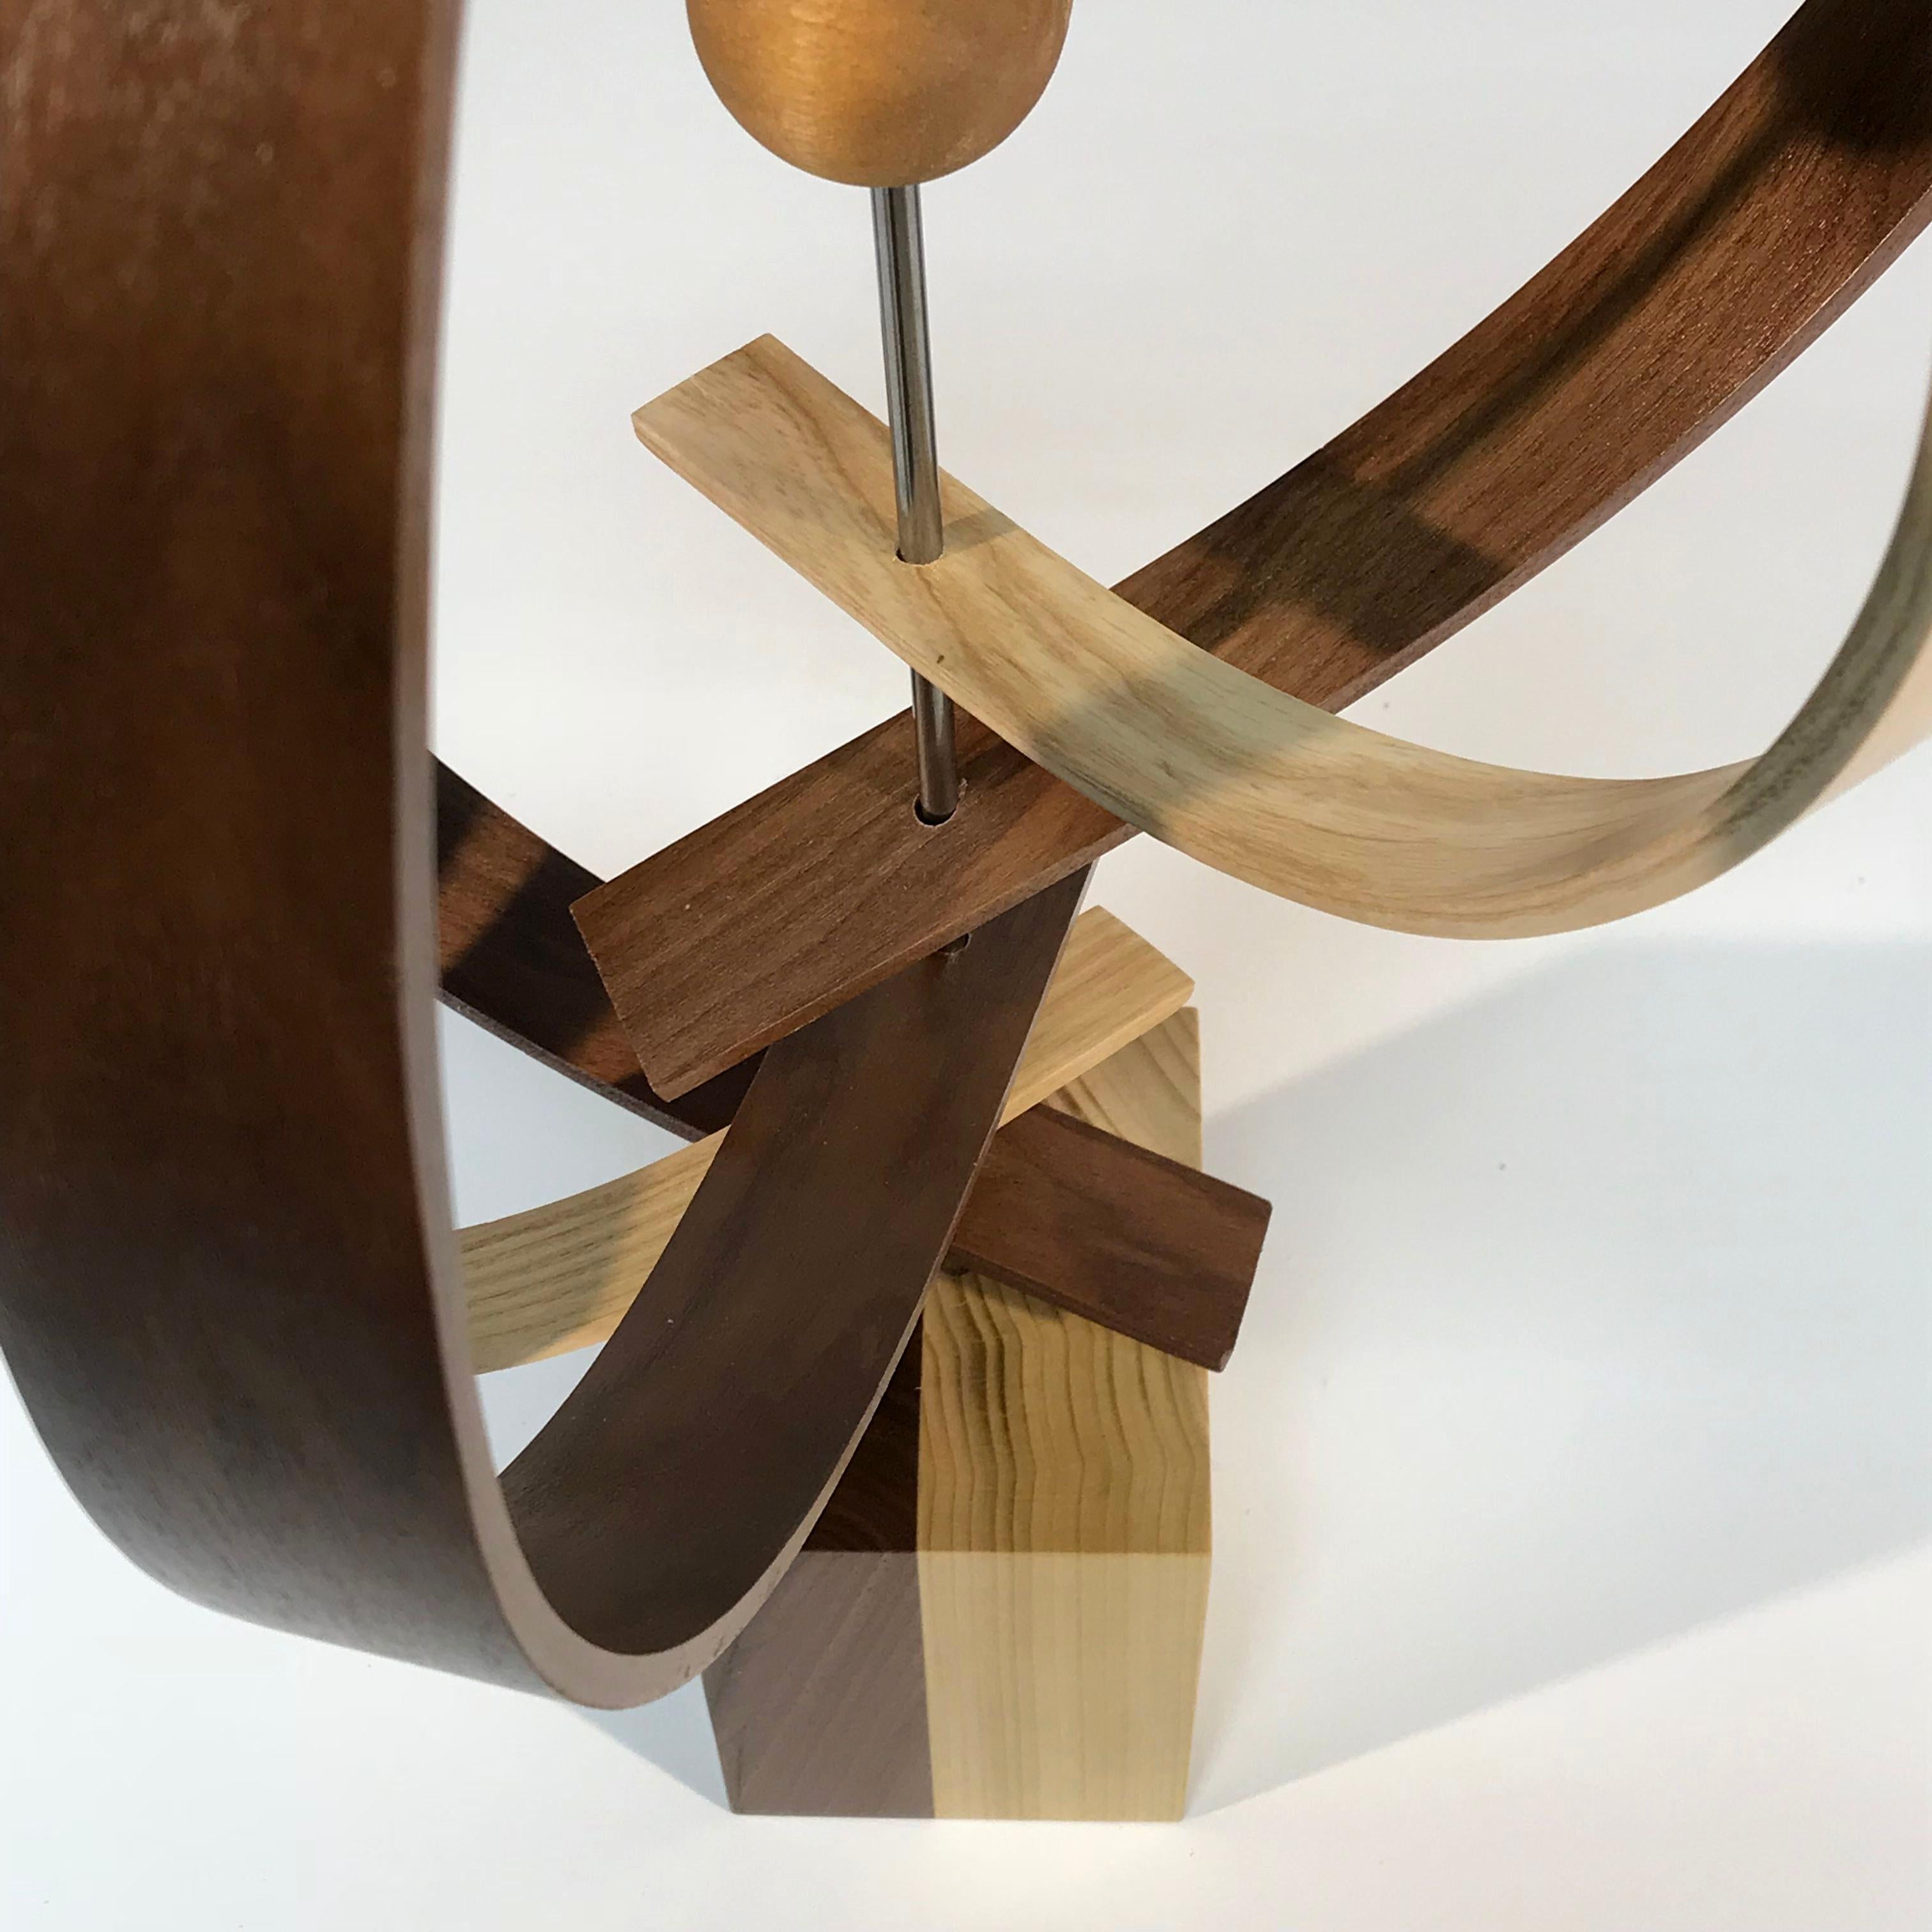 Wood Sculpture by Jeff L., Mid-Century Modern Inspired, Contemporary Abstract 3